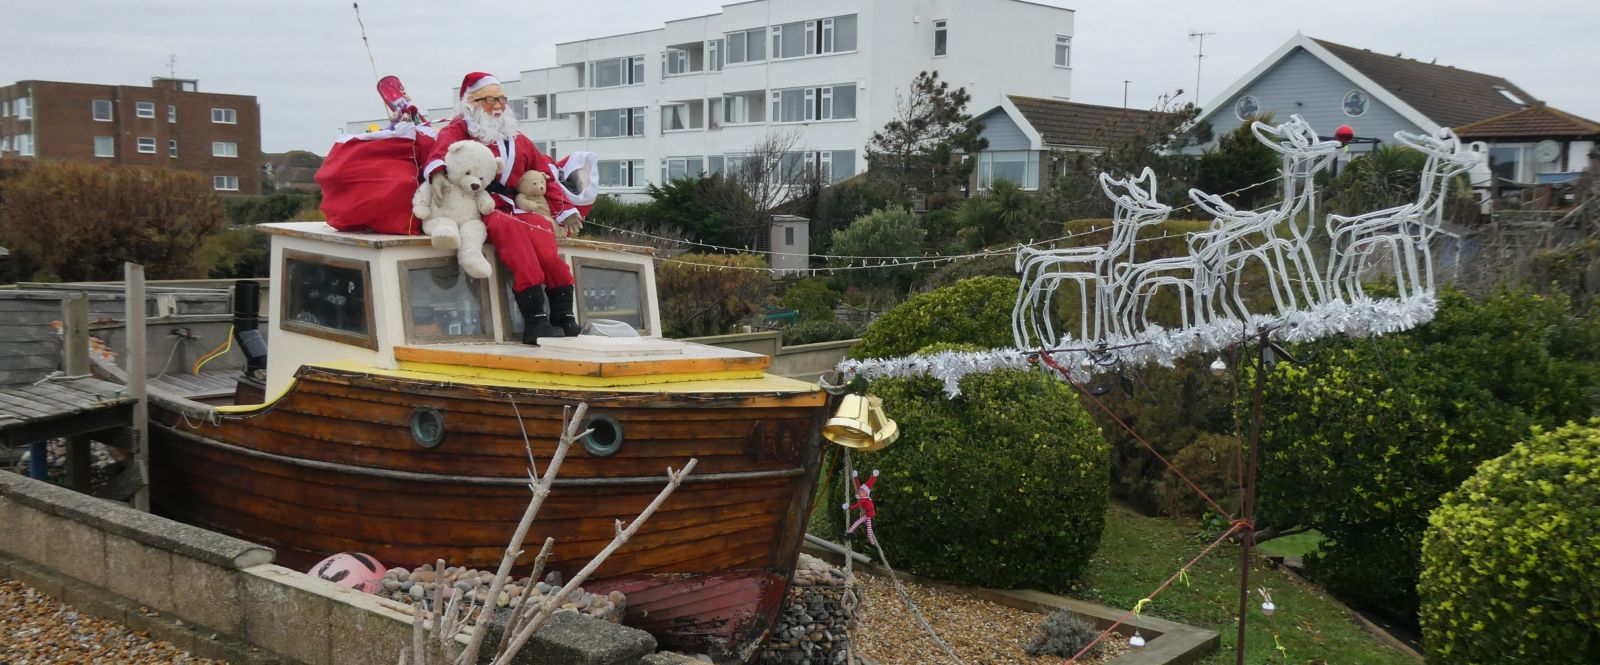 Father Christmas teddy and boat